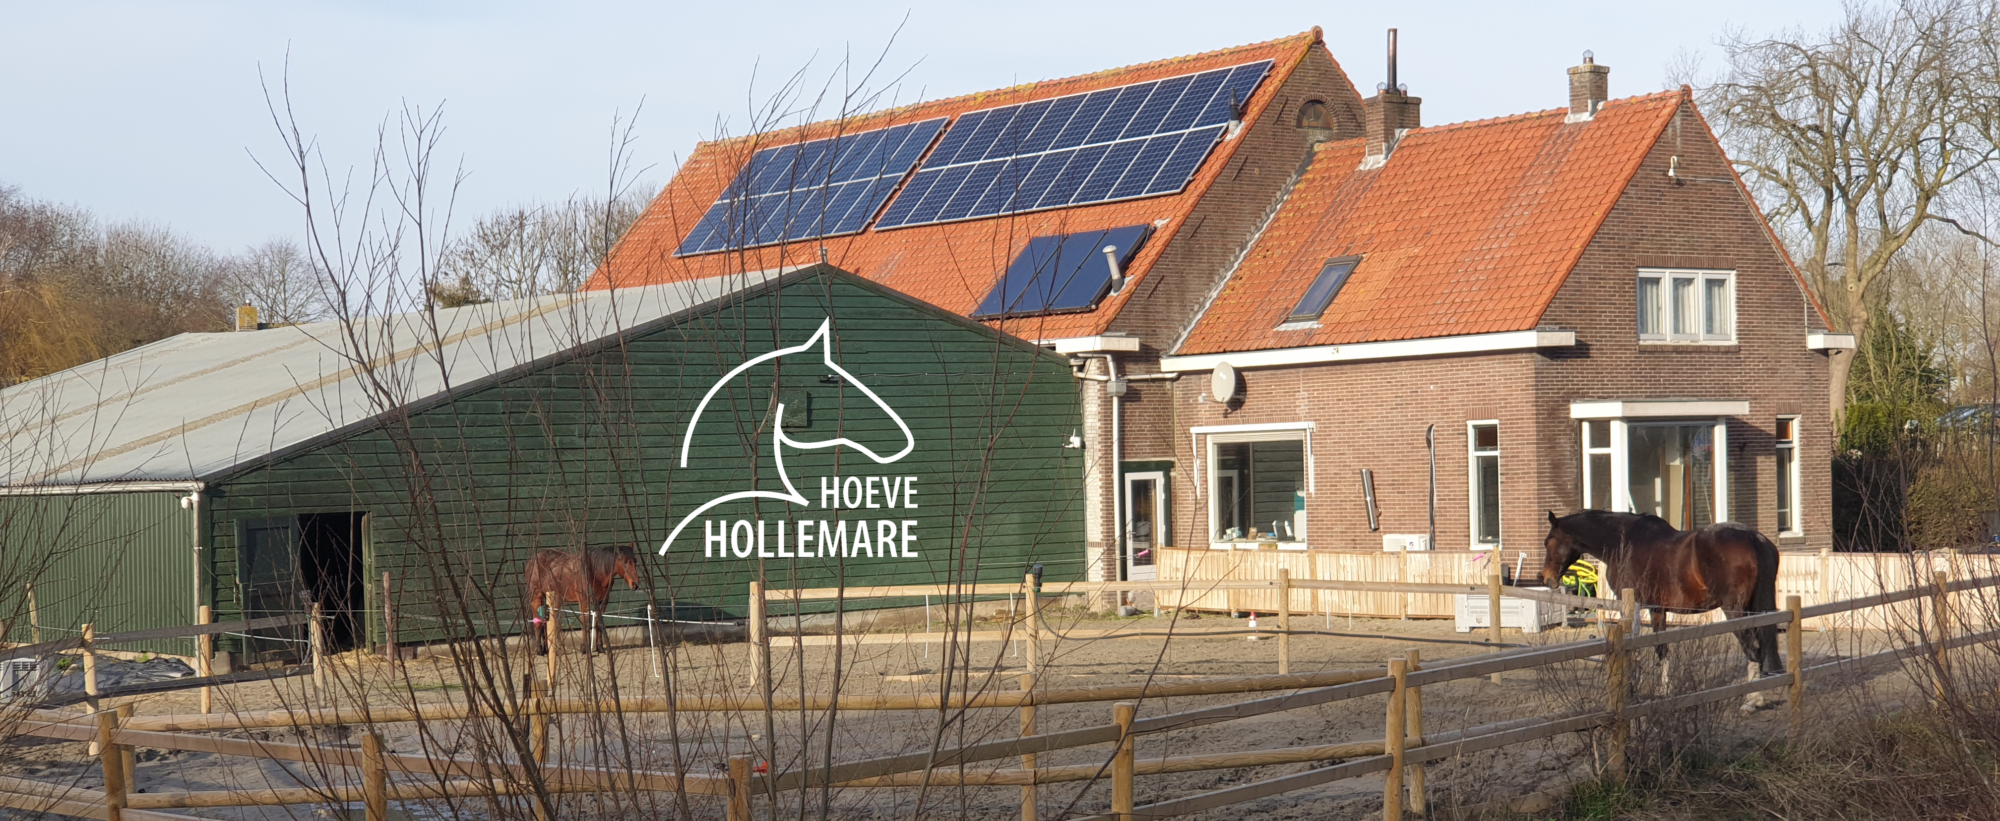 Hoeve Hollemare